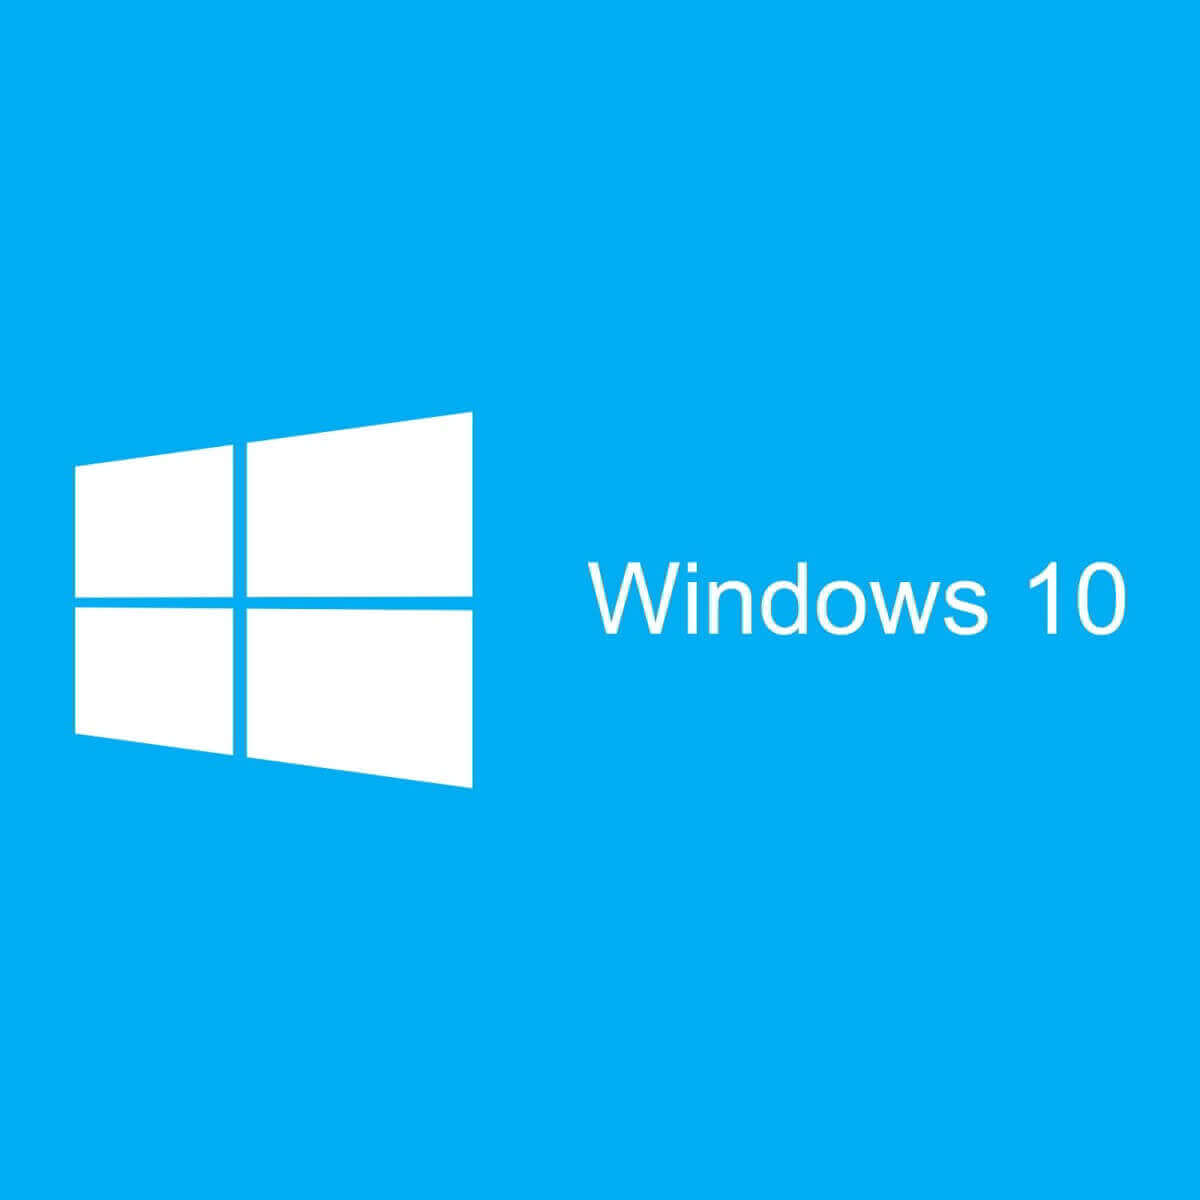 How to move Windows 10 to an external hard drive [COMPLETE GUIDE]